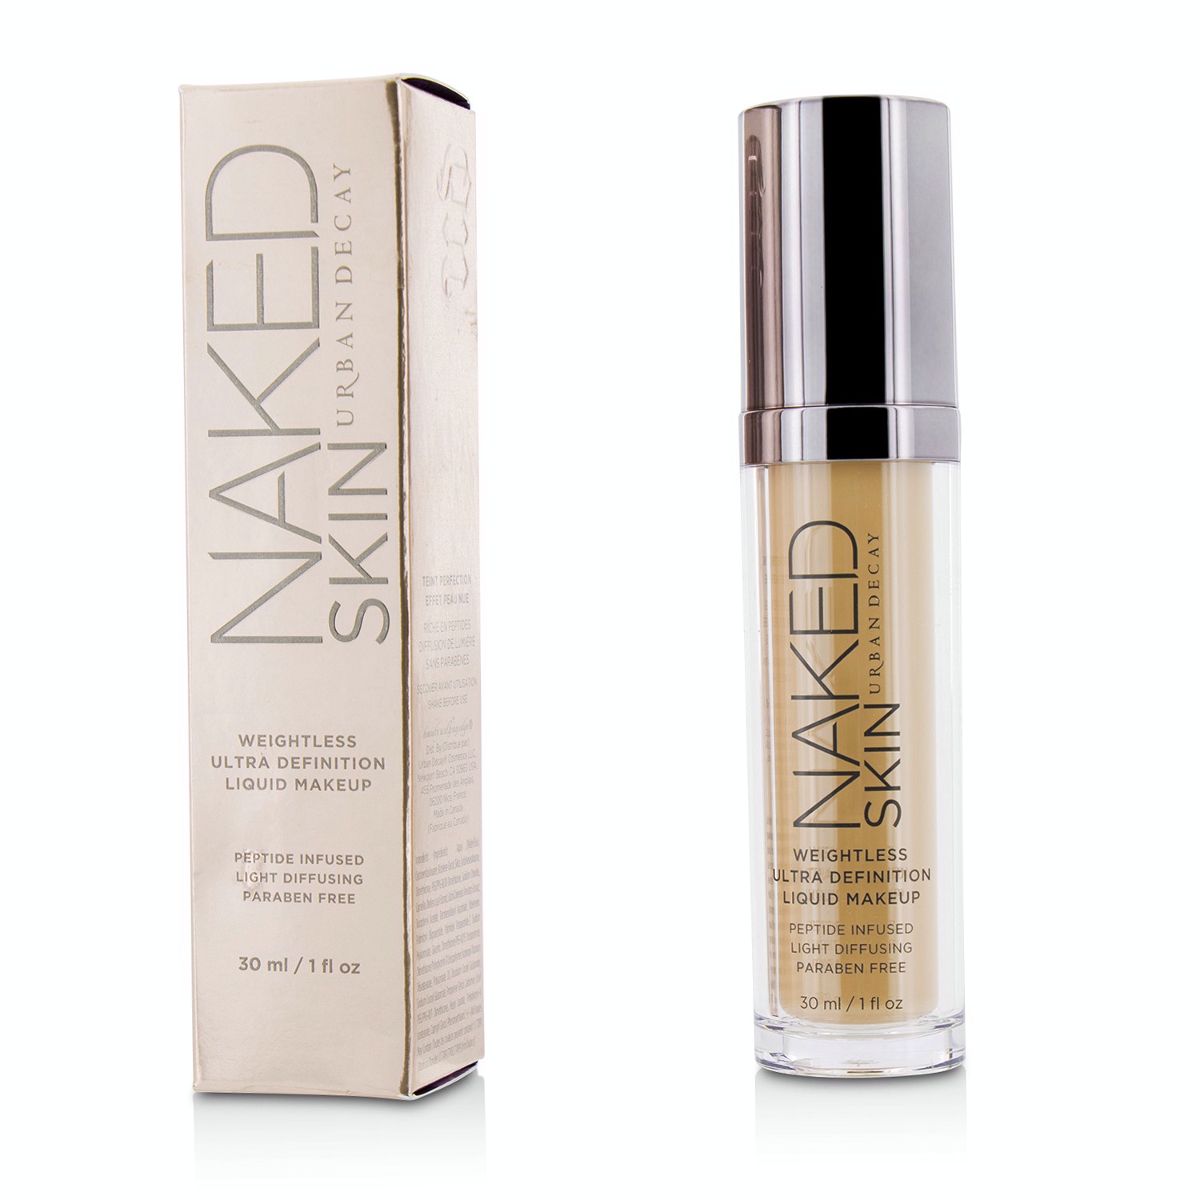 Naked Skin Weightless Ultra Definition Liquid Makeup - #0.5 Urban Decay Image